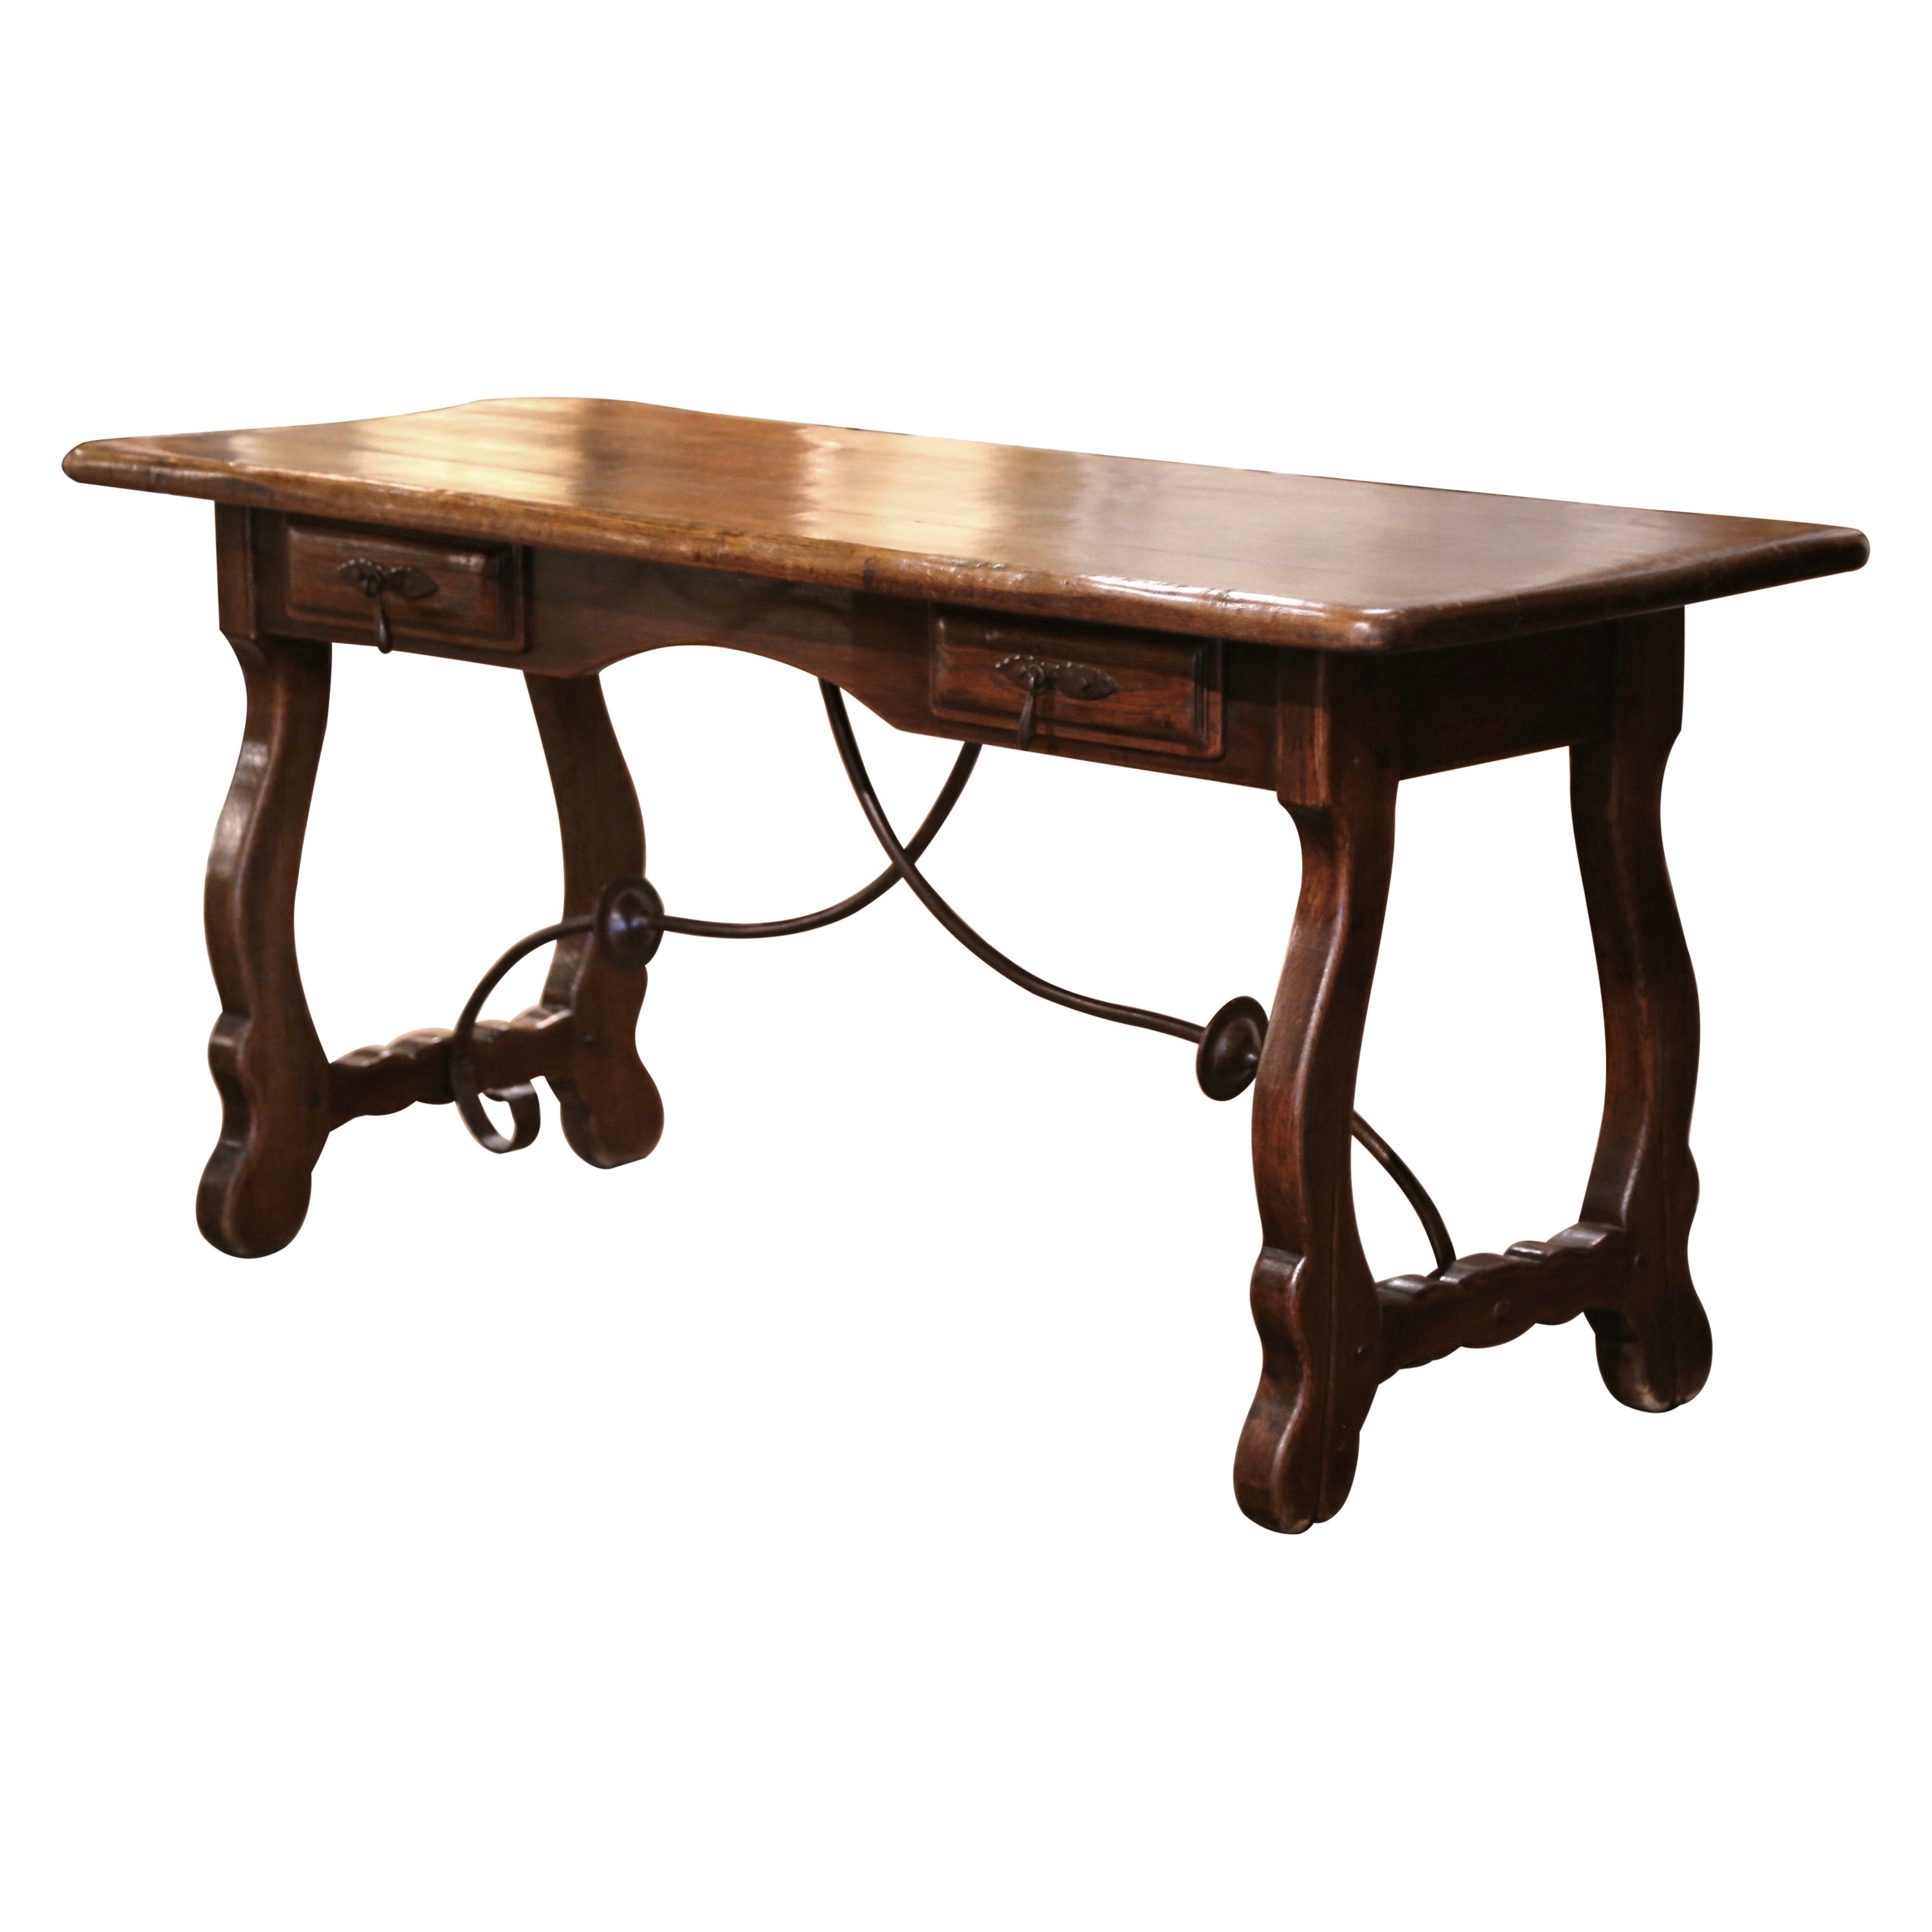 Early 20th Century Spanish Carved Oak Writing Table Desk with Iron Stretcher